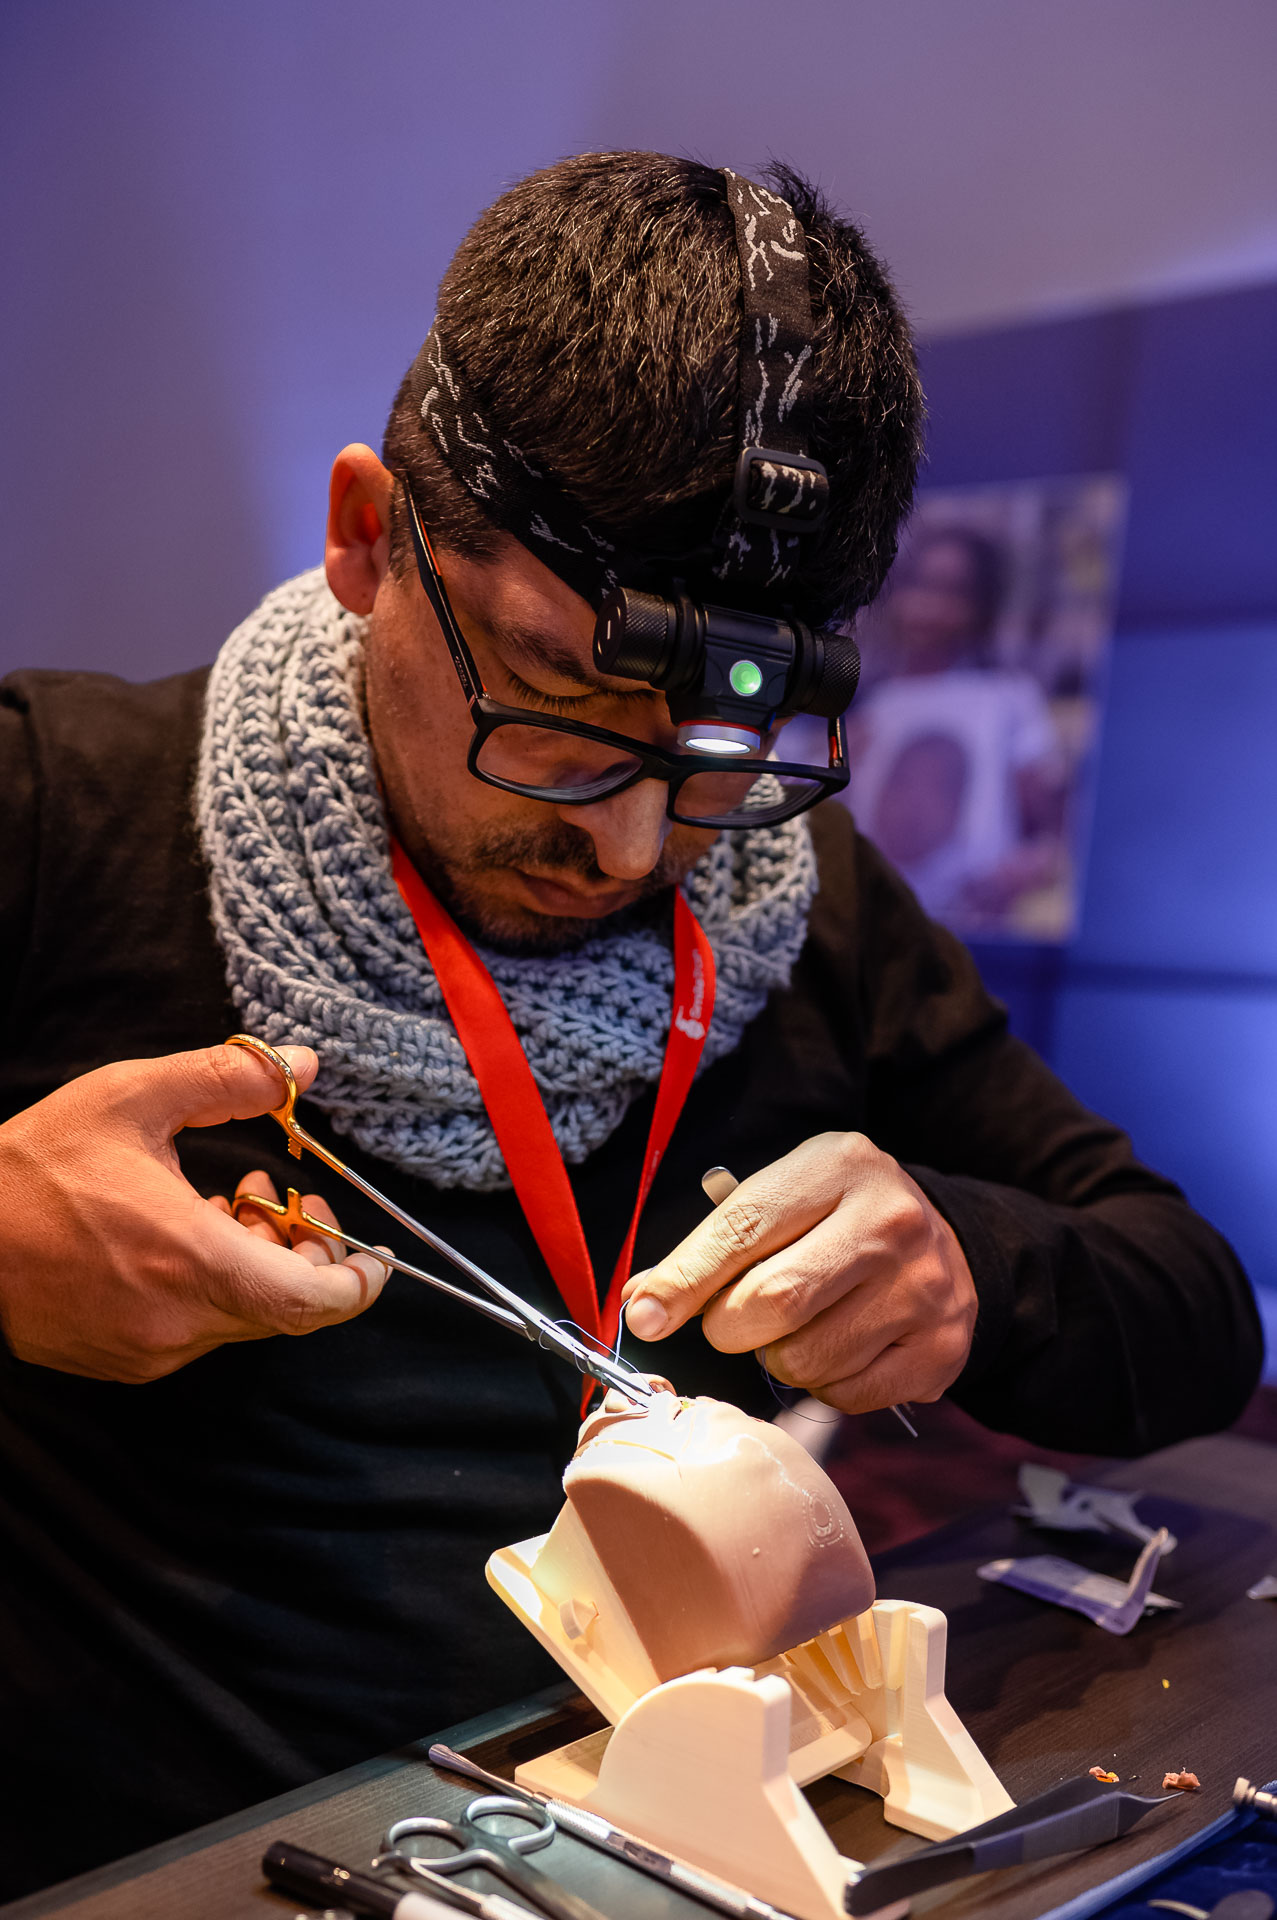 Huáscar Aillón wearing a headlamp sewing medical stitches onto a Simulare cleft model